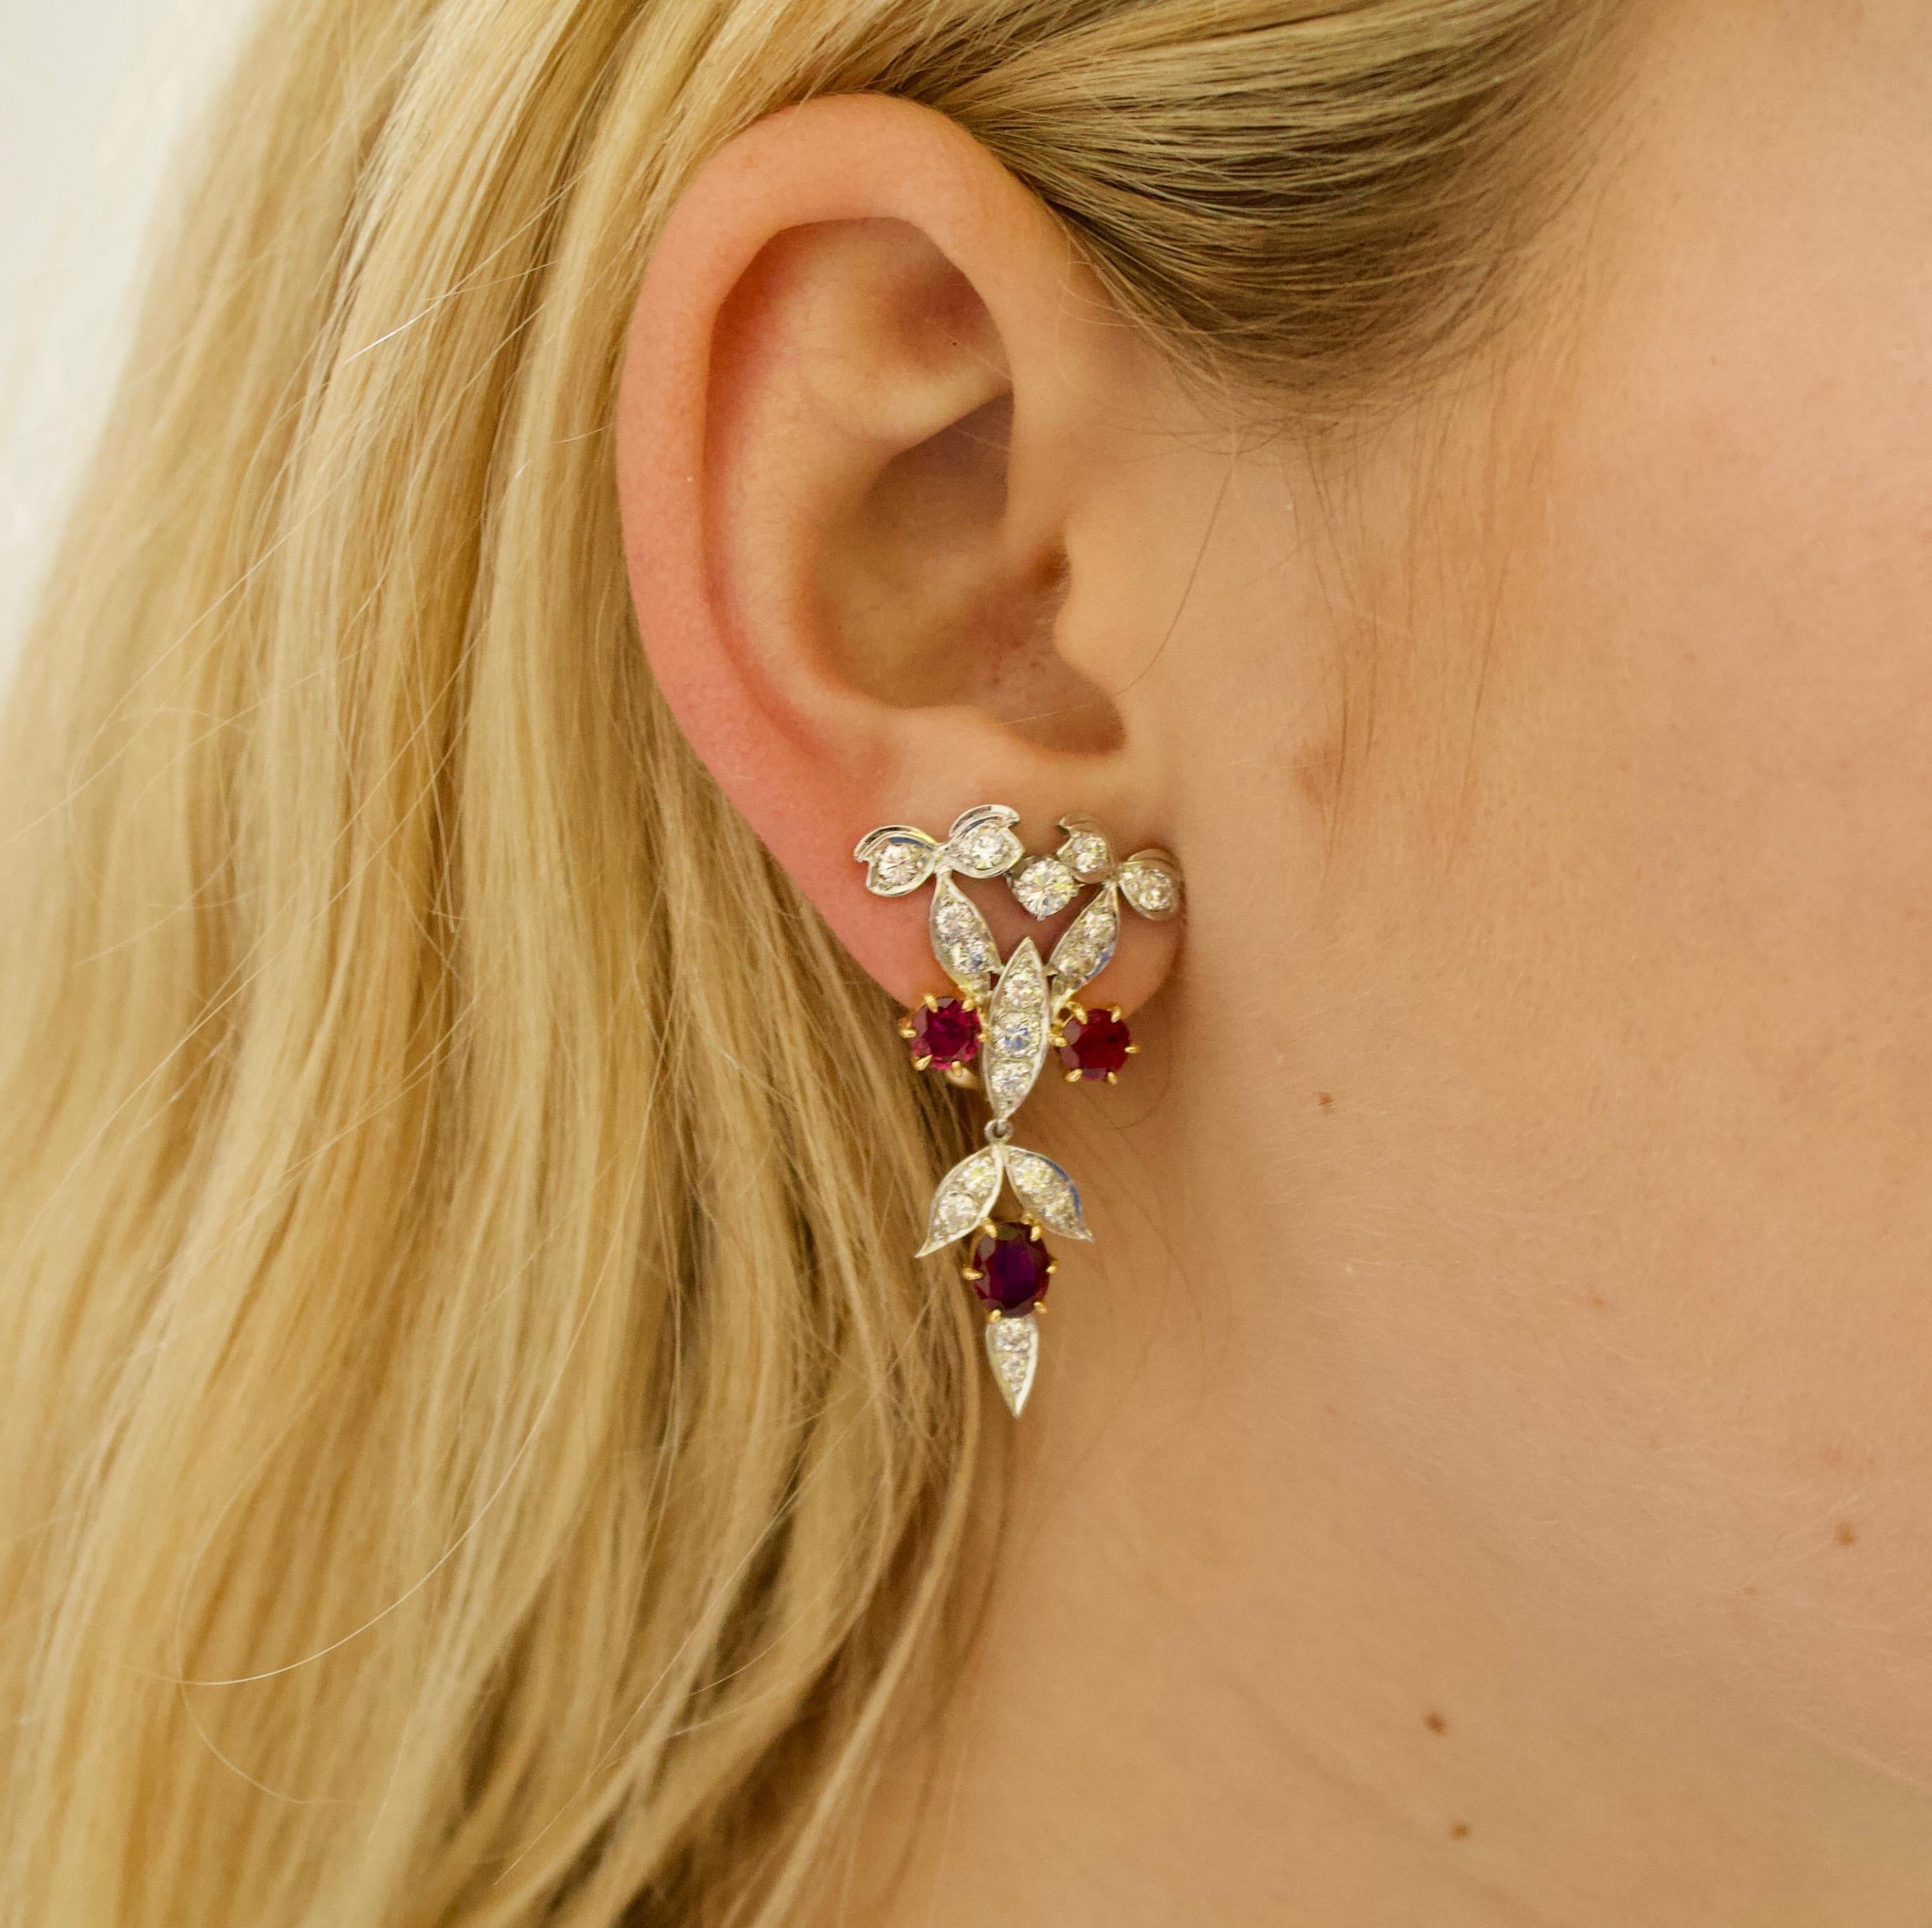 Dramatic Ruby and Diamond Dangling Earrings Circa 1940's in Platinum and 18k
Two Oval Rubies weighing 1.60 carats approximately
Four Oval Rubies weighing 1.40 carats approximately
Thirty Six Round Brilliant Cut Diamonds weighing 2.50 carats